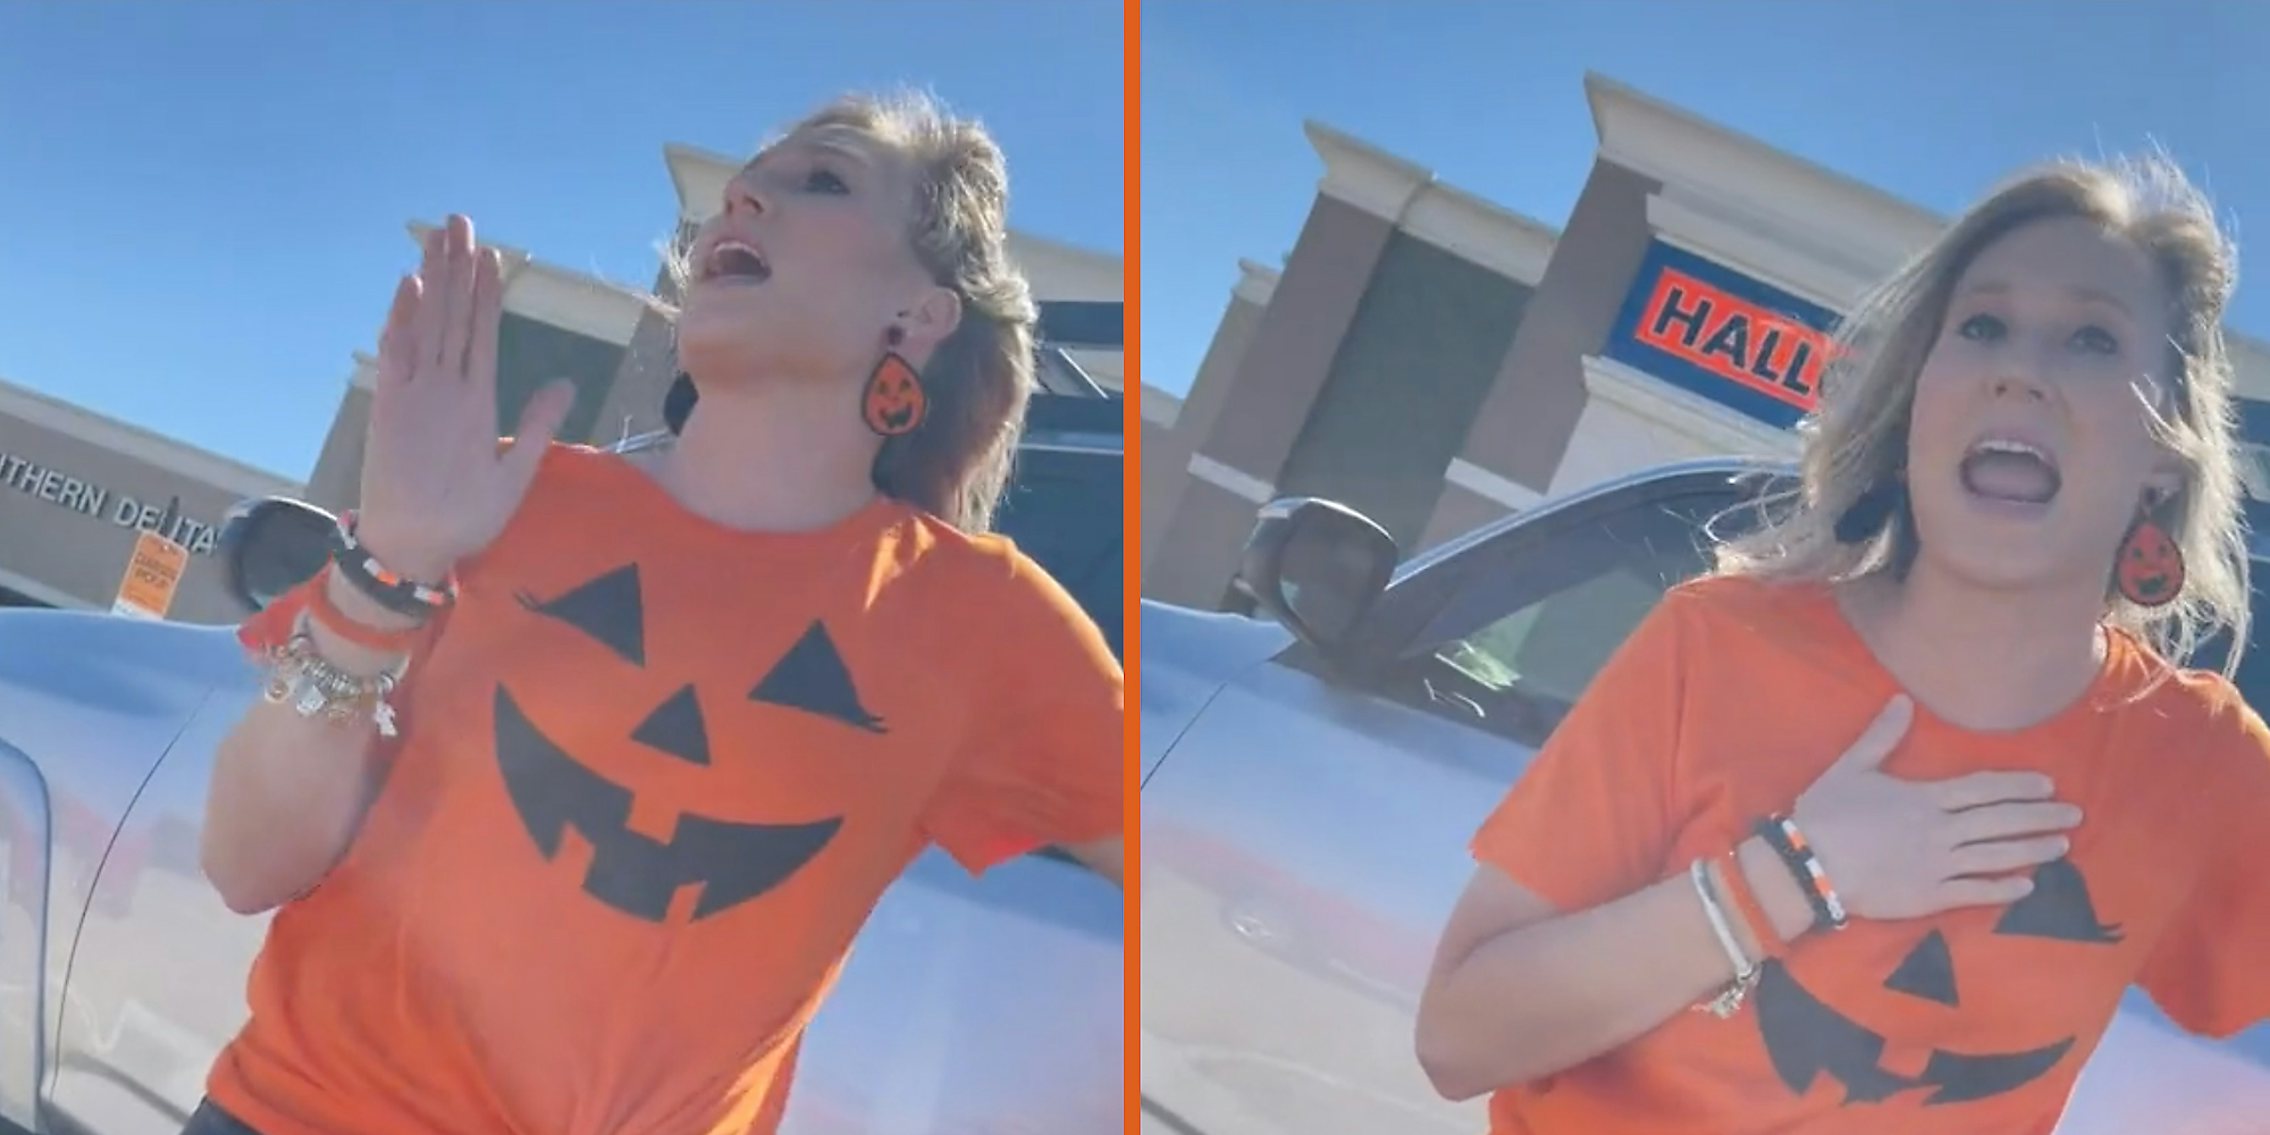 A woman yelling in a parking lot.